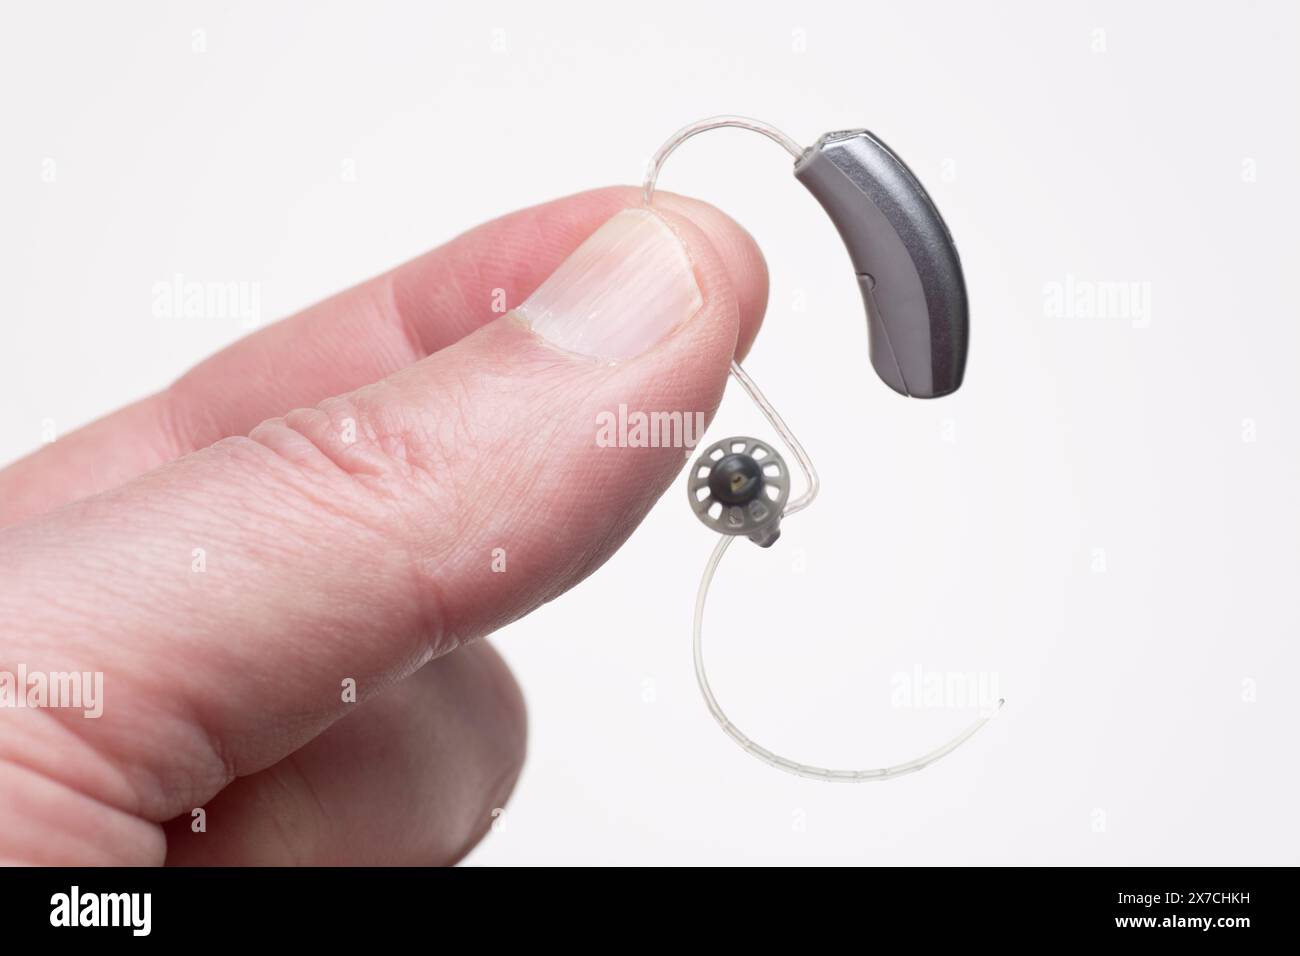 Close-up of showing small discreet hearing aid between fingers Stock Photo